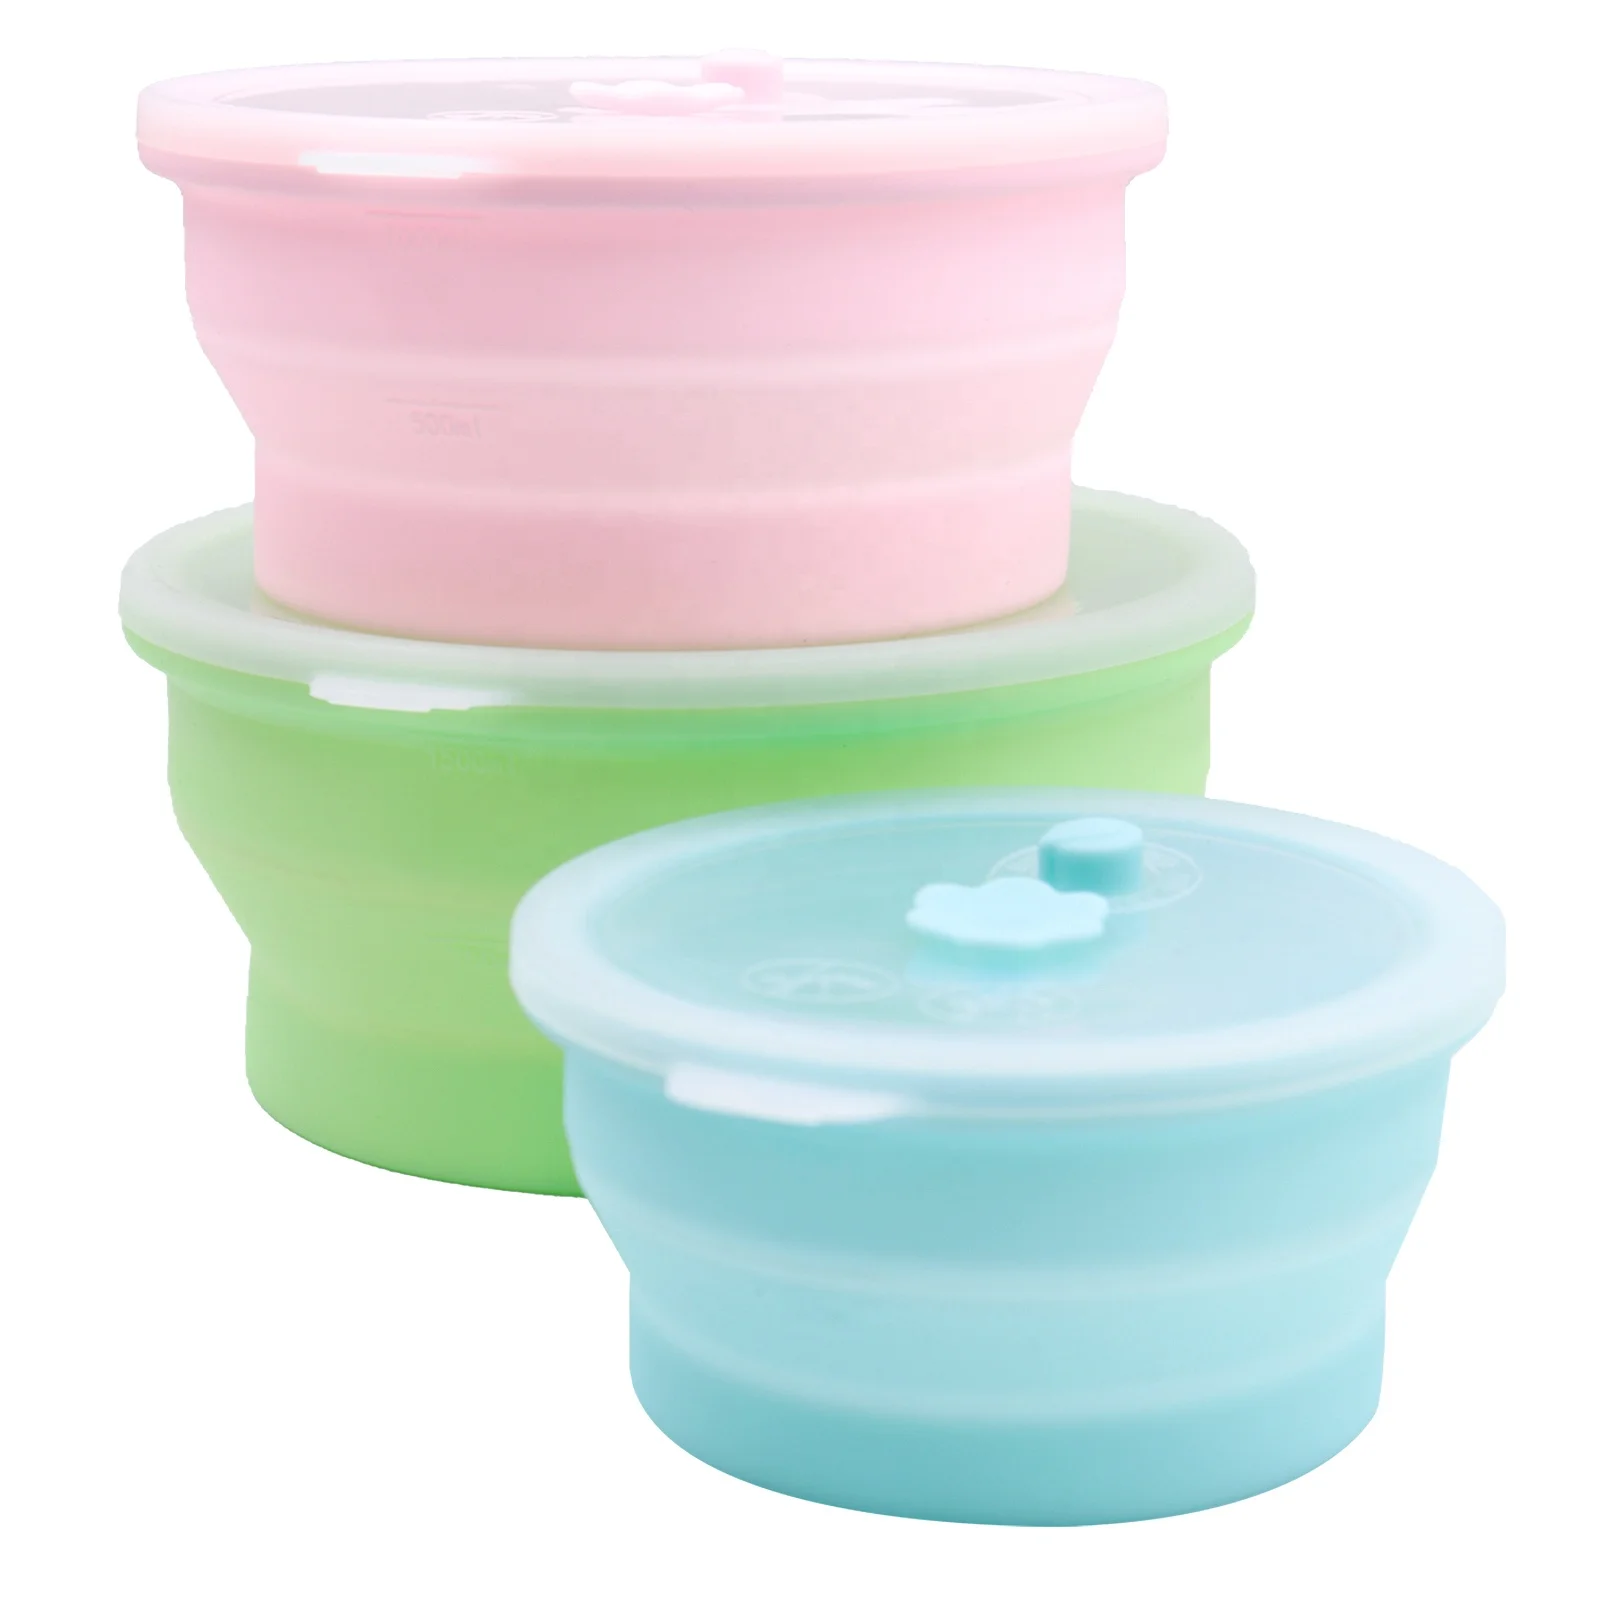 

Bpa Free Foldable Silicone Lunch Boxes for Kids Collapsible Airtight Food Storage Containers with Silicone Lid, Blue, green, pink, purple